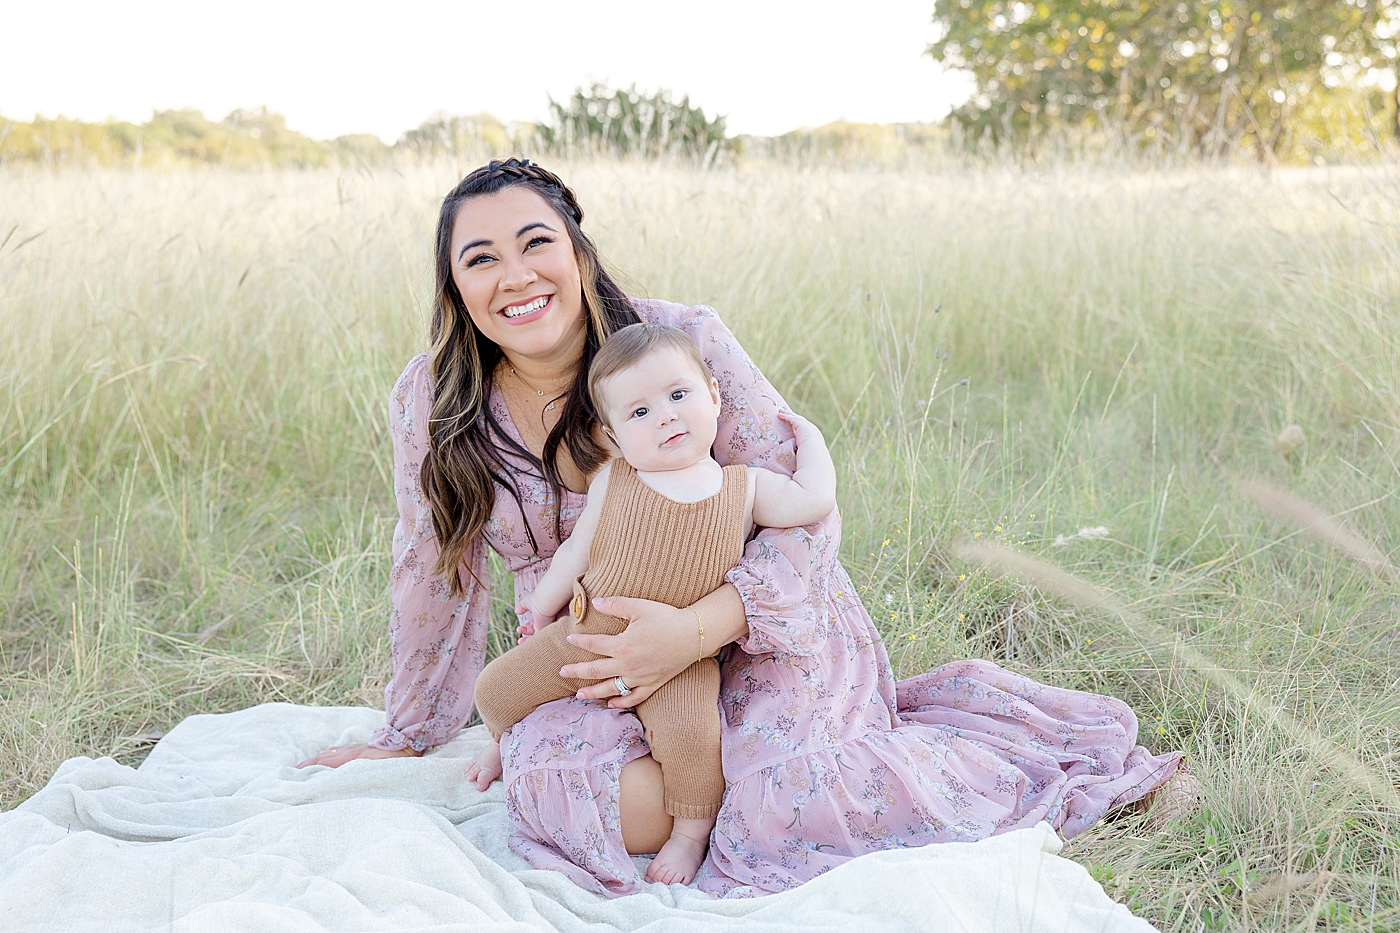 Mom in pink dress sitting in the grass with her baby boy | Image by Sana Ahmed Photography